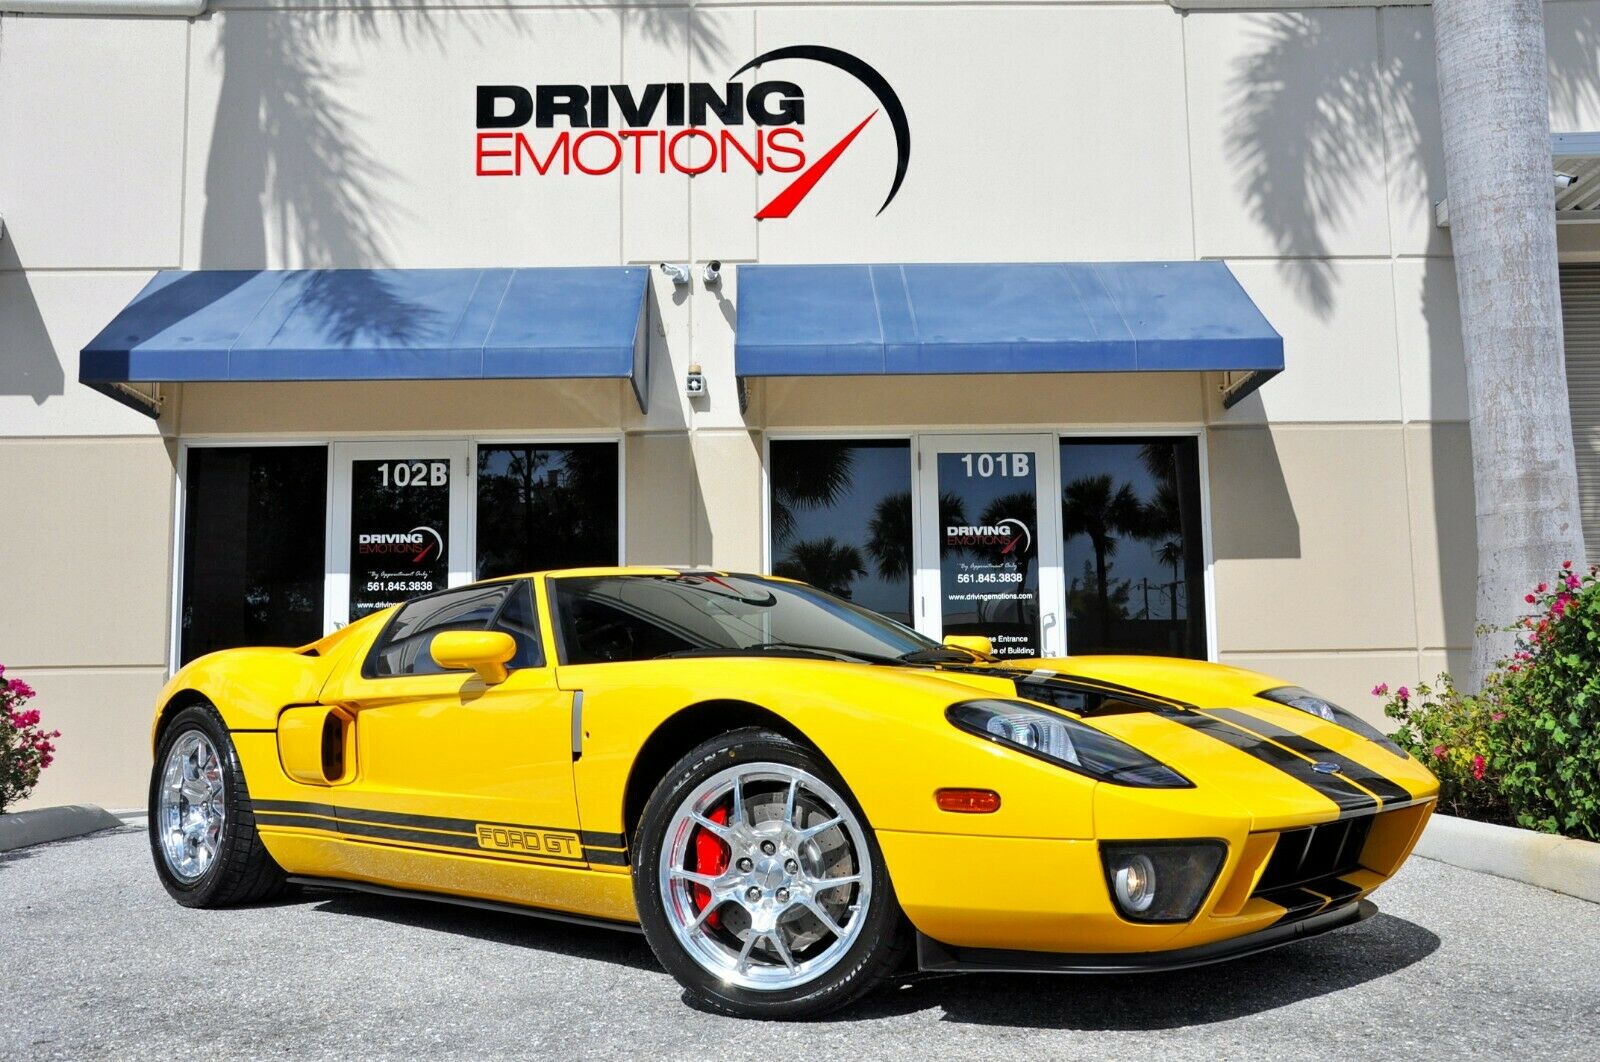 2006 Ford Ford Gt All 4 Options! Collector! 2006 Ford Gt! Speed Yellow! All 4 Options! Low Miles! Collector!